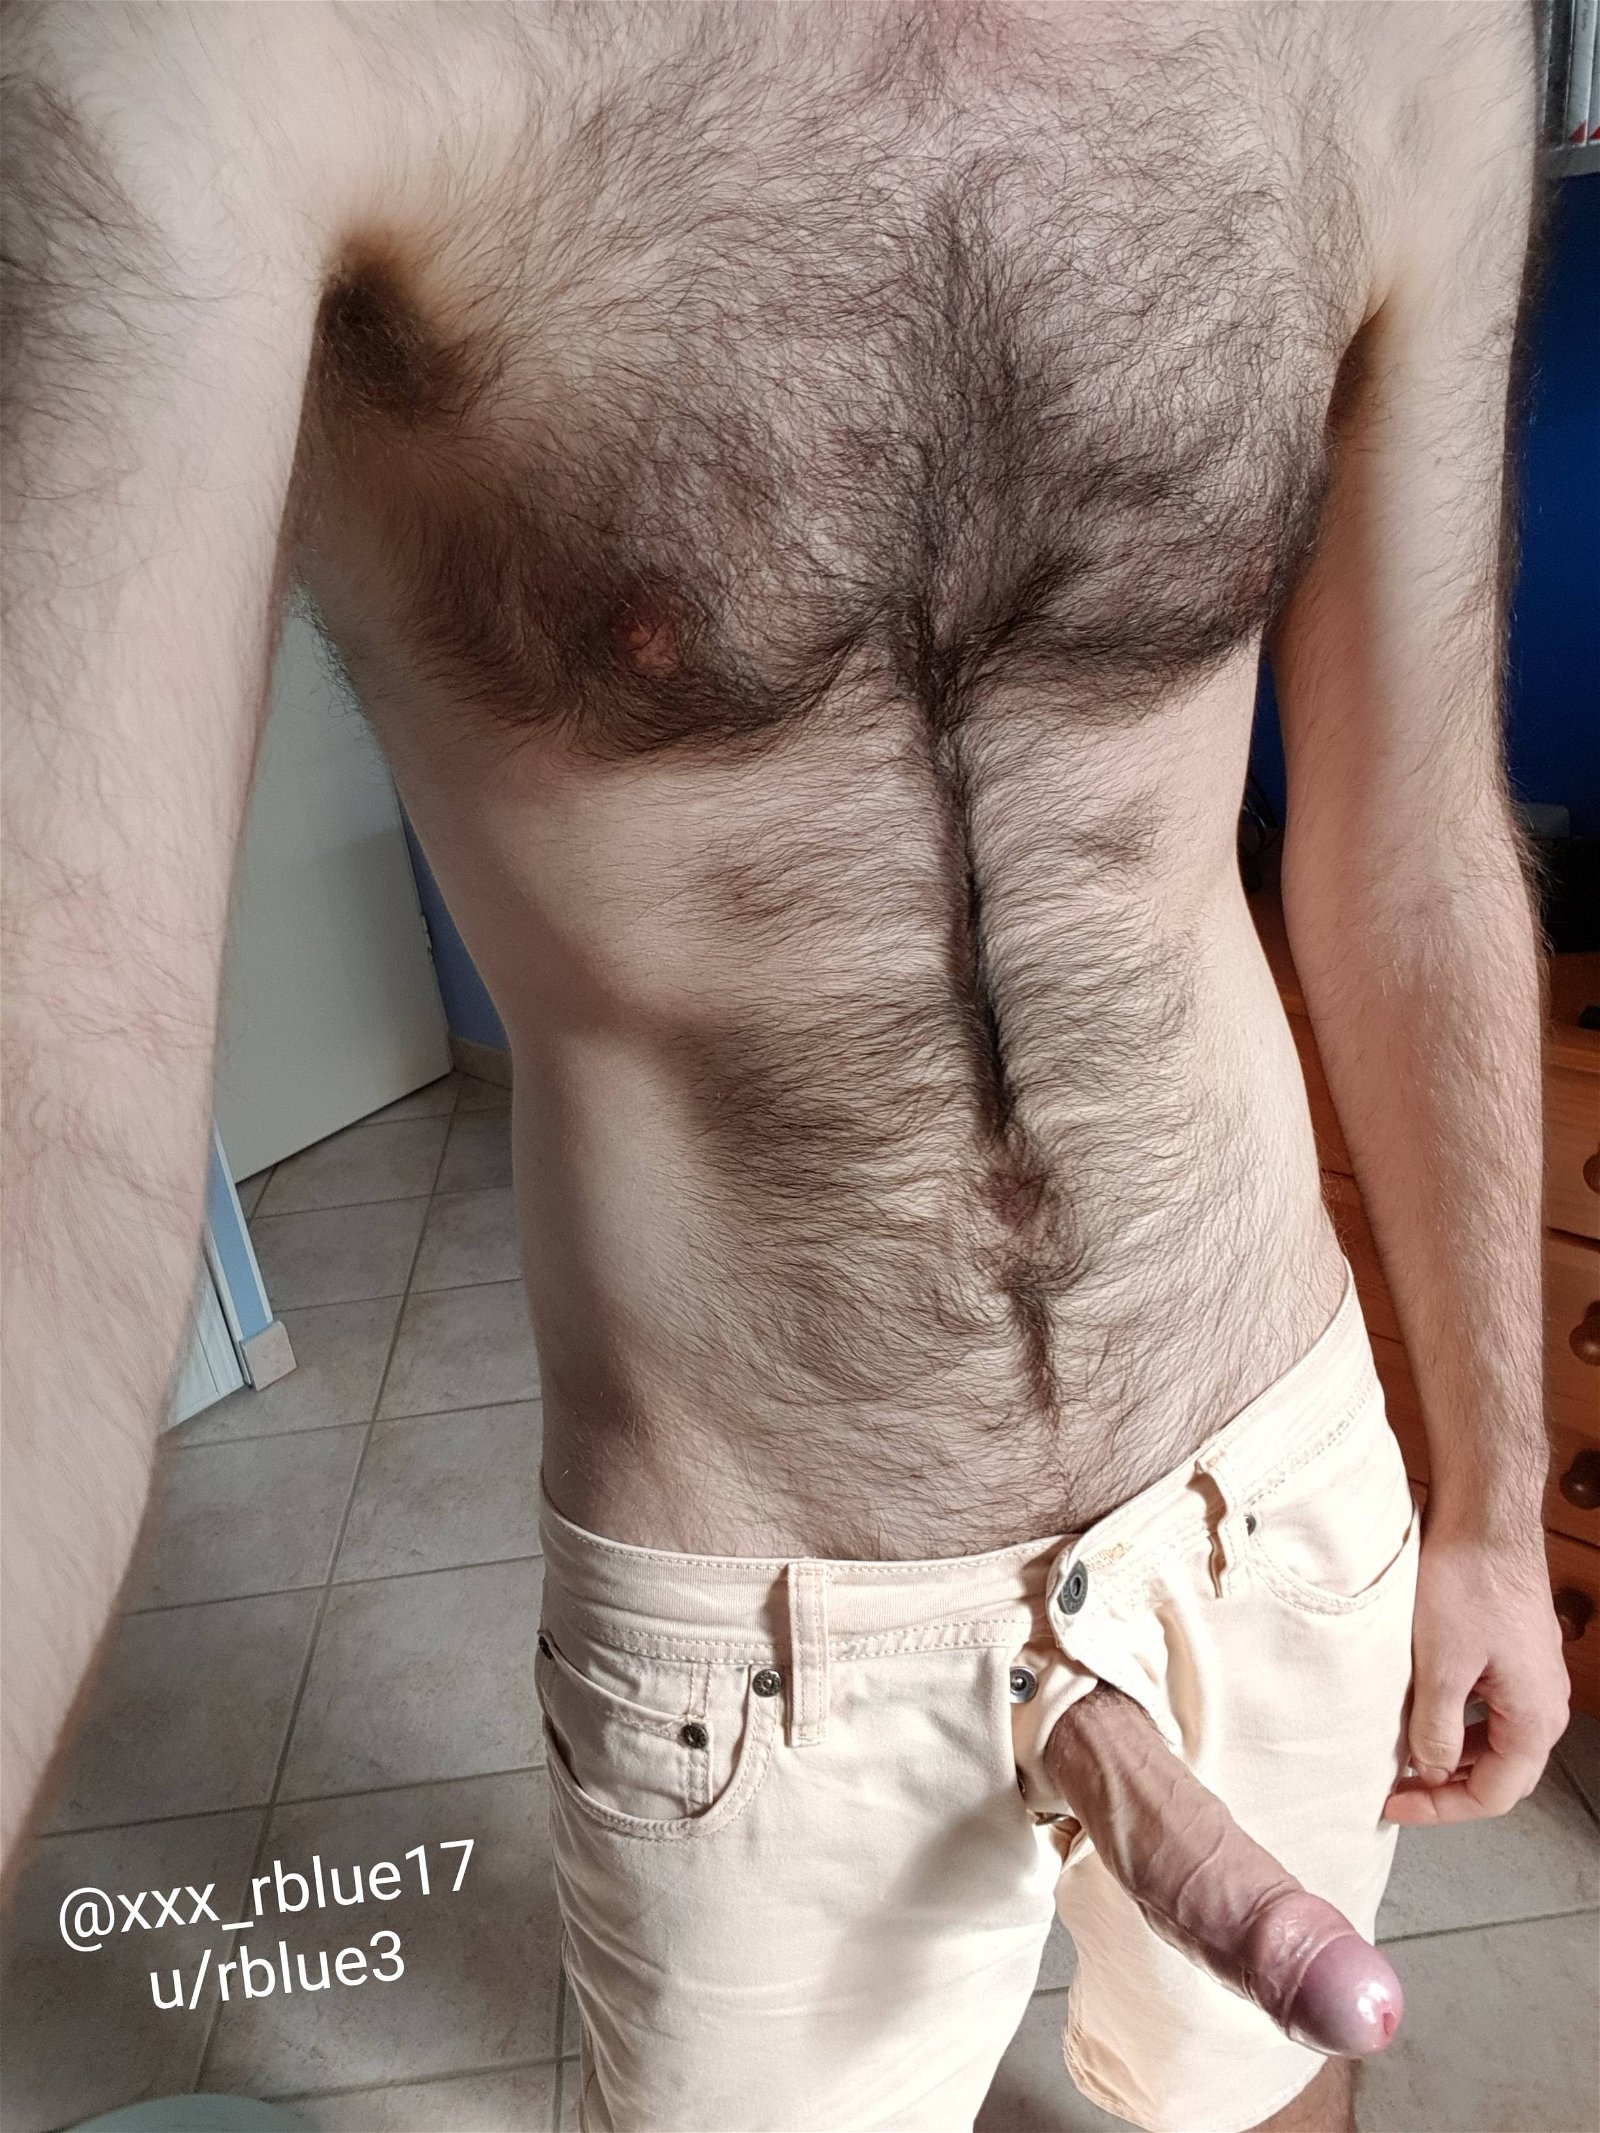 Photo by rblue with the username @rblue17,  March 8, 2019 at 12:19 PM and the text says 'Uncut veiny dick   hairy body ='